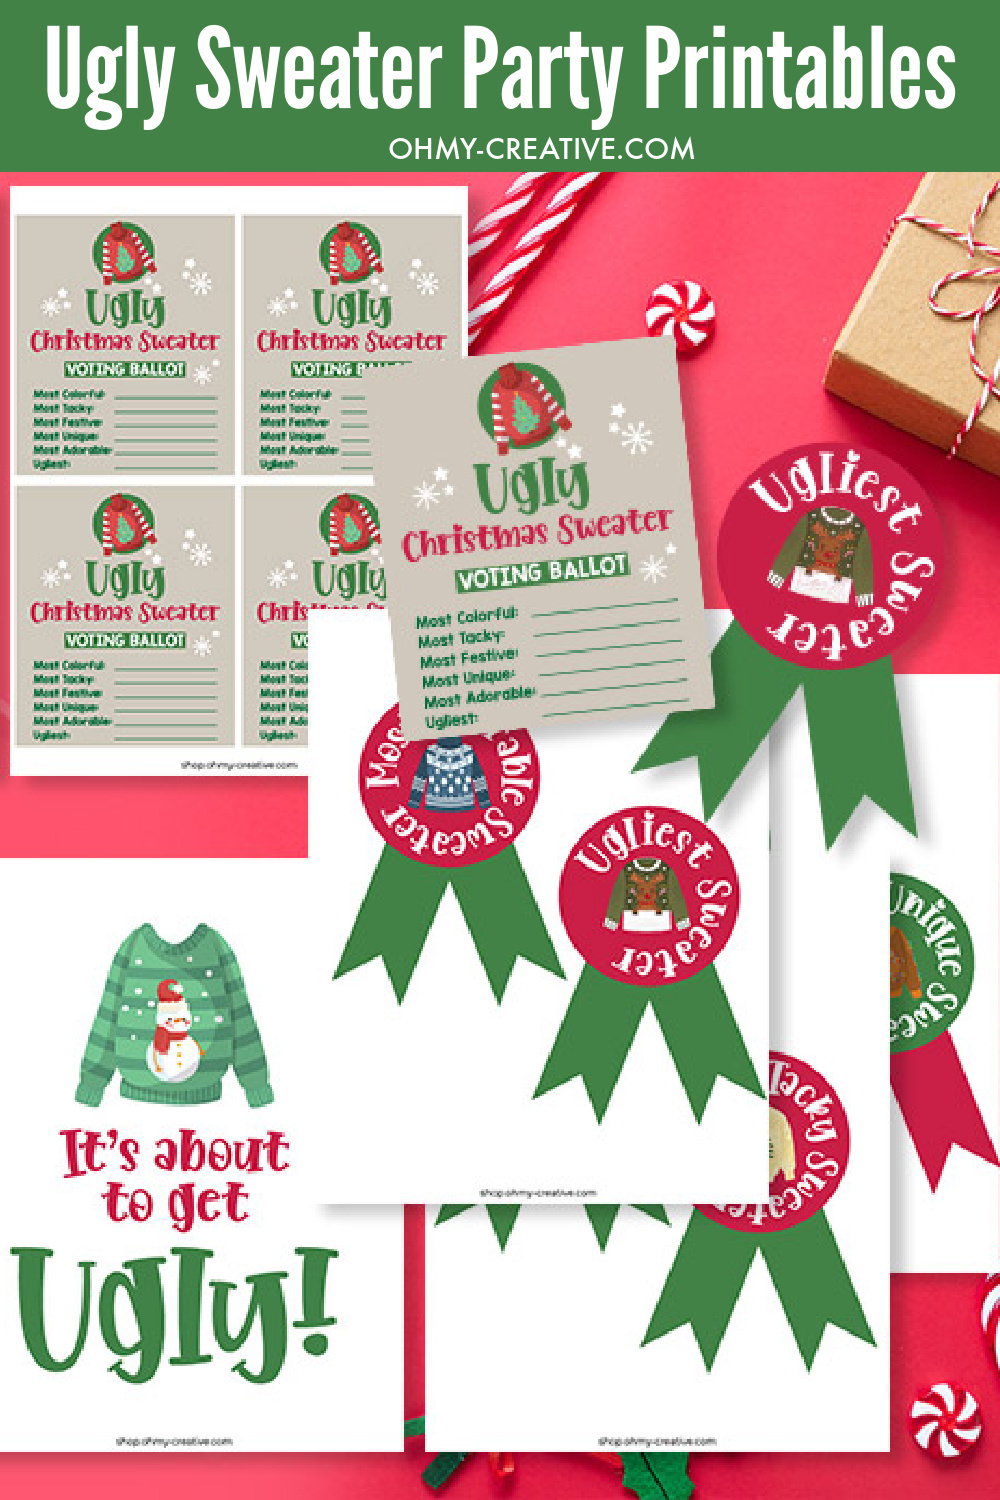 Included in the Ugly Sweater Party Printables is ugly sweater invitations, ugly sweater voting ballots, ugly Christmas sweater decorations and ugly Christmas sweater awards!